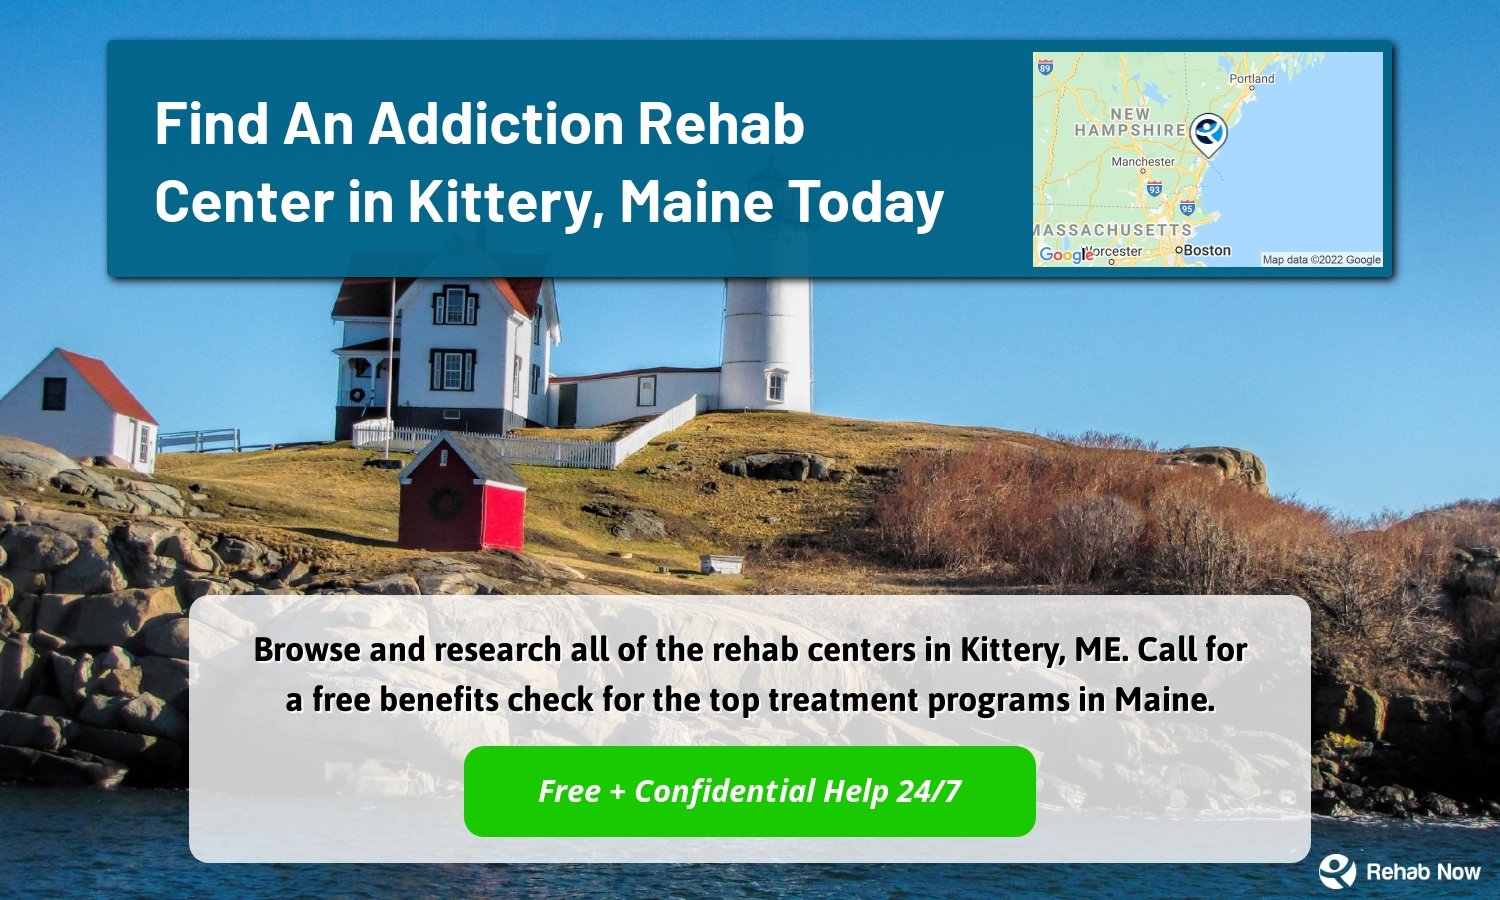 Browse and research all of the rehab centers in Kittery, ME. Call for a free benefits check for the top treatment programs in Maine.